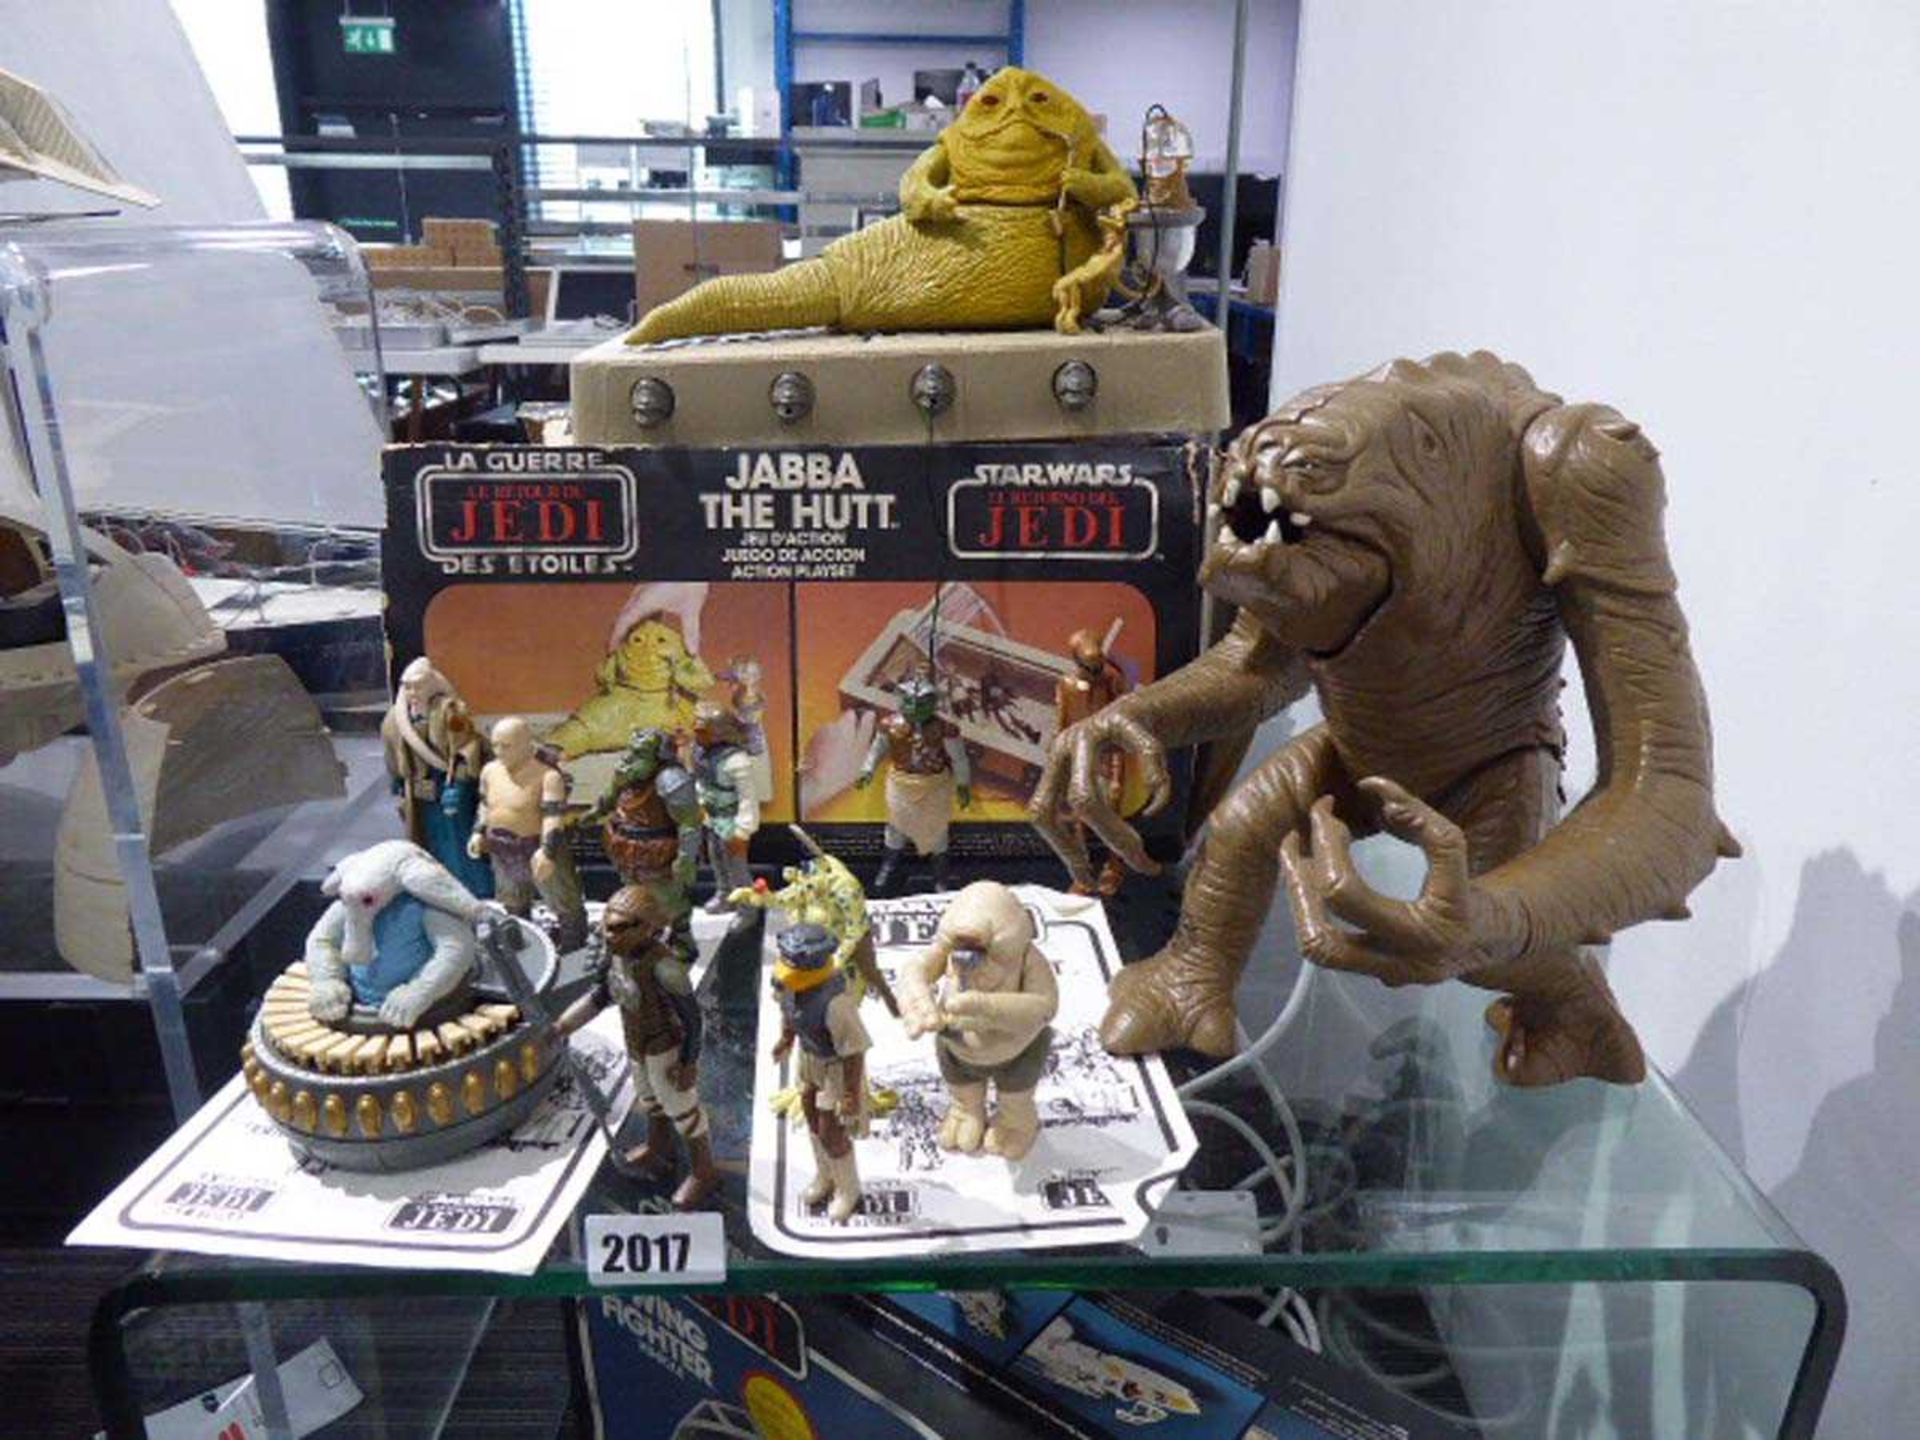 Jabba the Hutt Star Wars Return of the Jedi playset together with various figures to include the